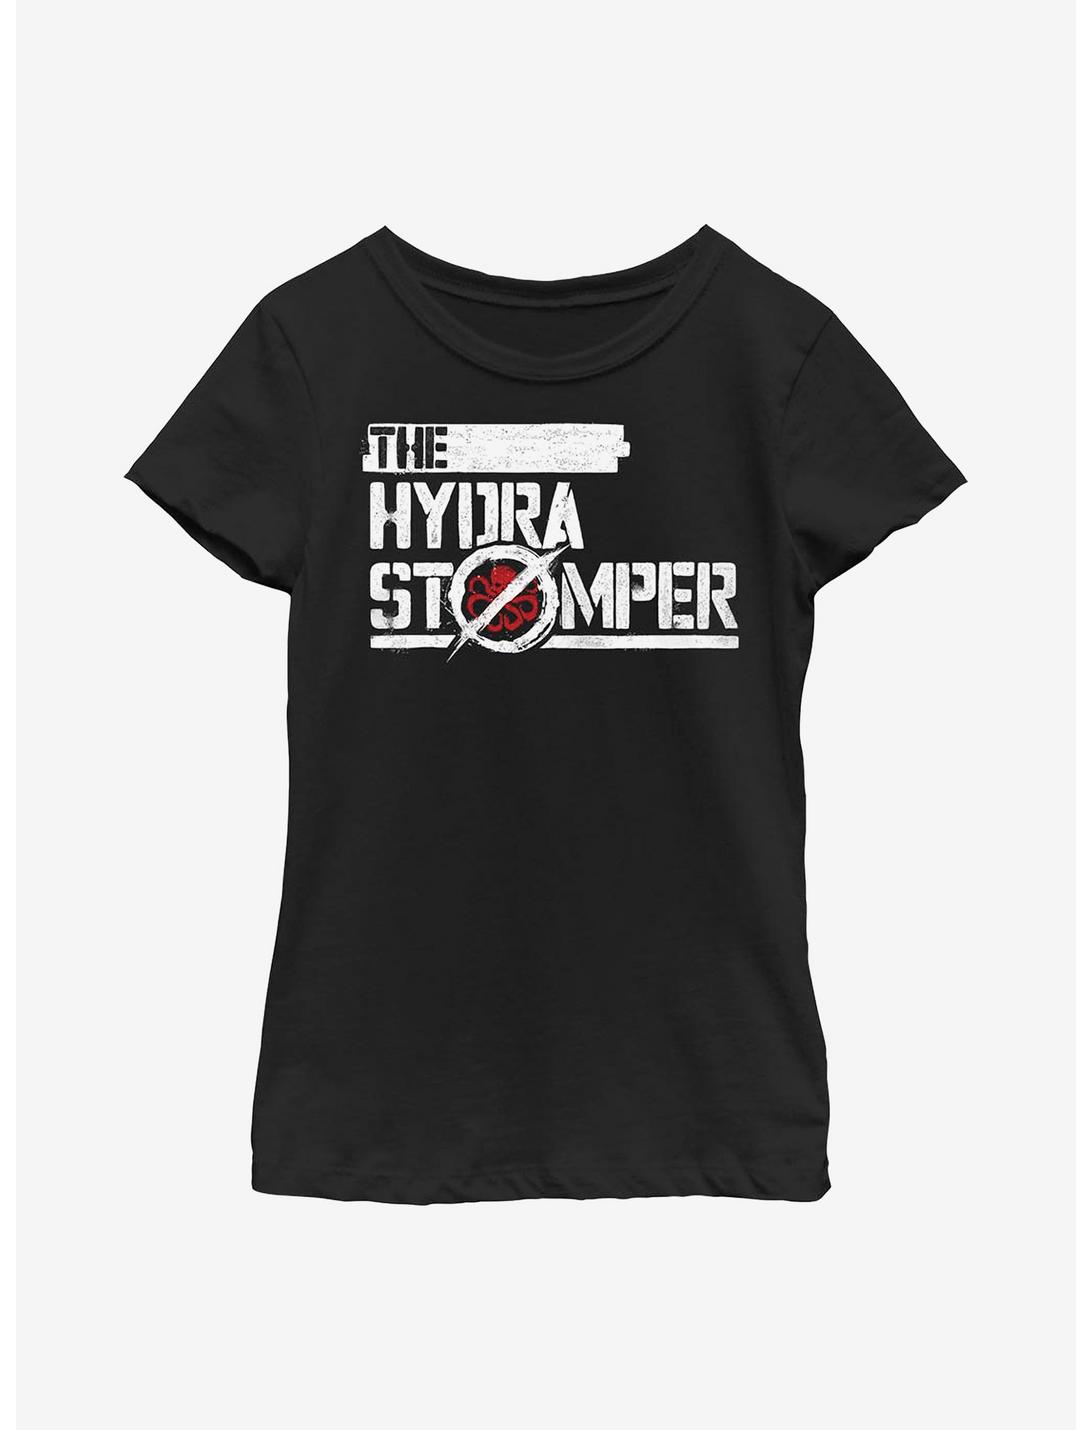 Marvel What If...? Hydra Stomper Youth Girls T-Shirt, BLACK, hi-res